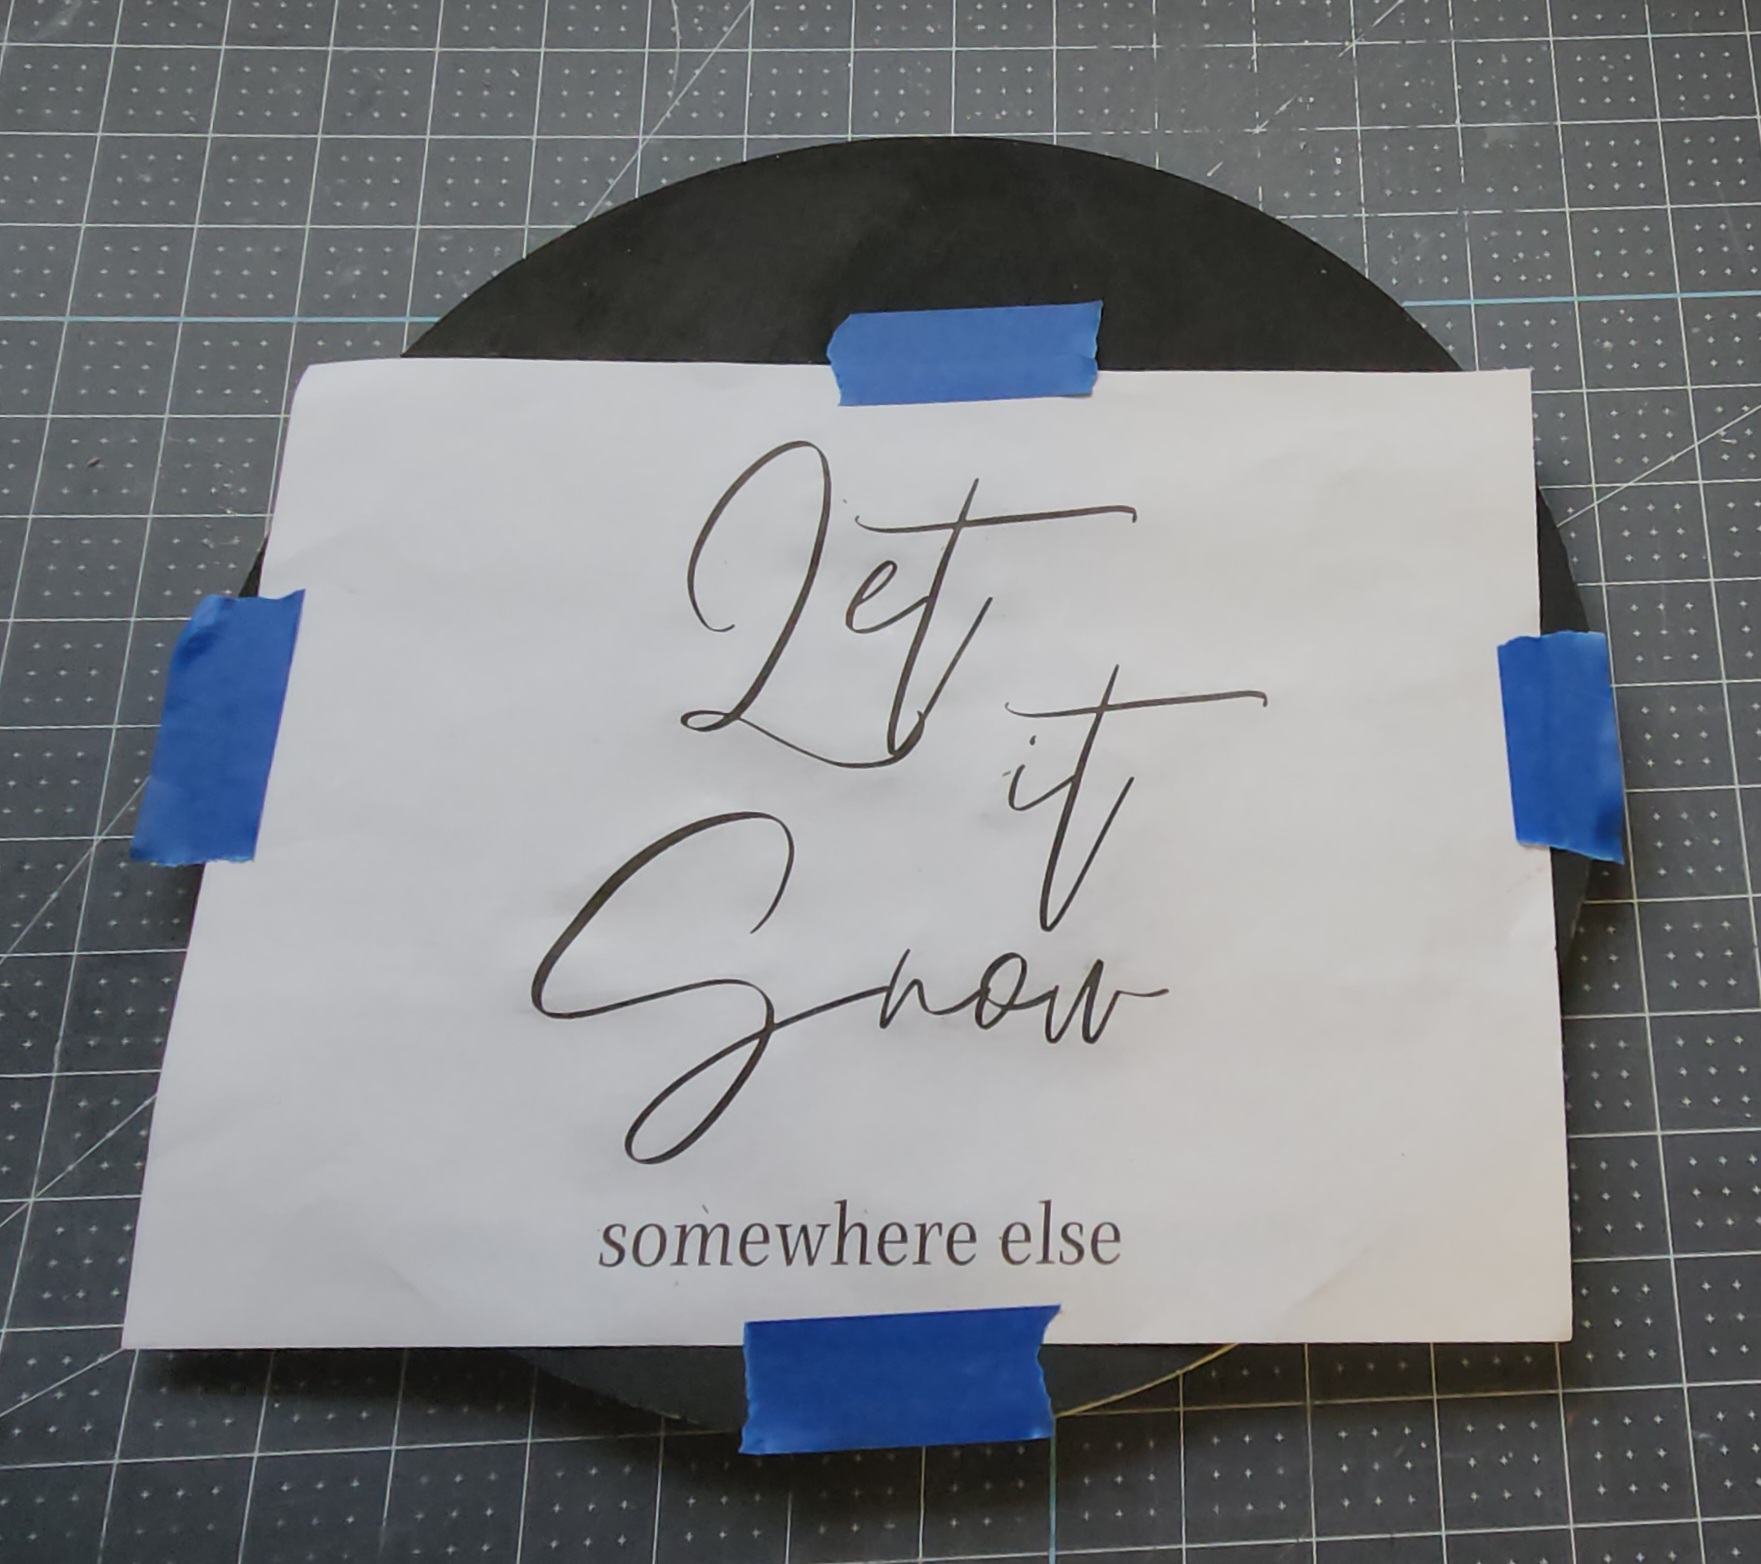 "Let it snow somewhere else" printed on paper and taped to a round piece of black wood with painter's tape.